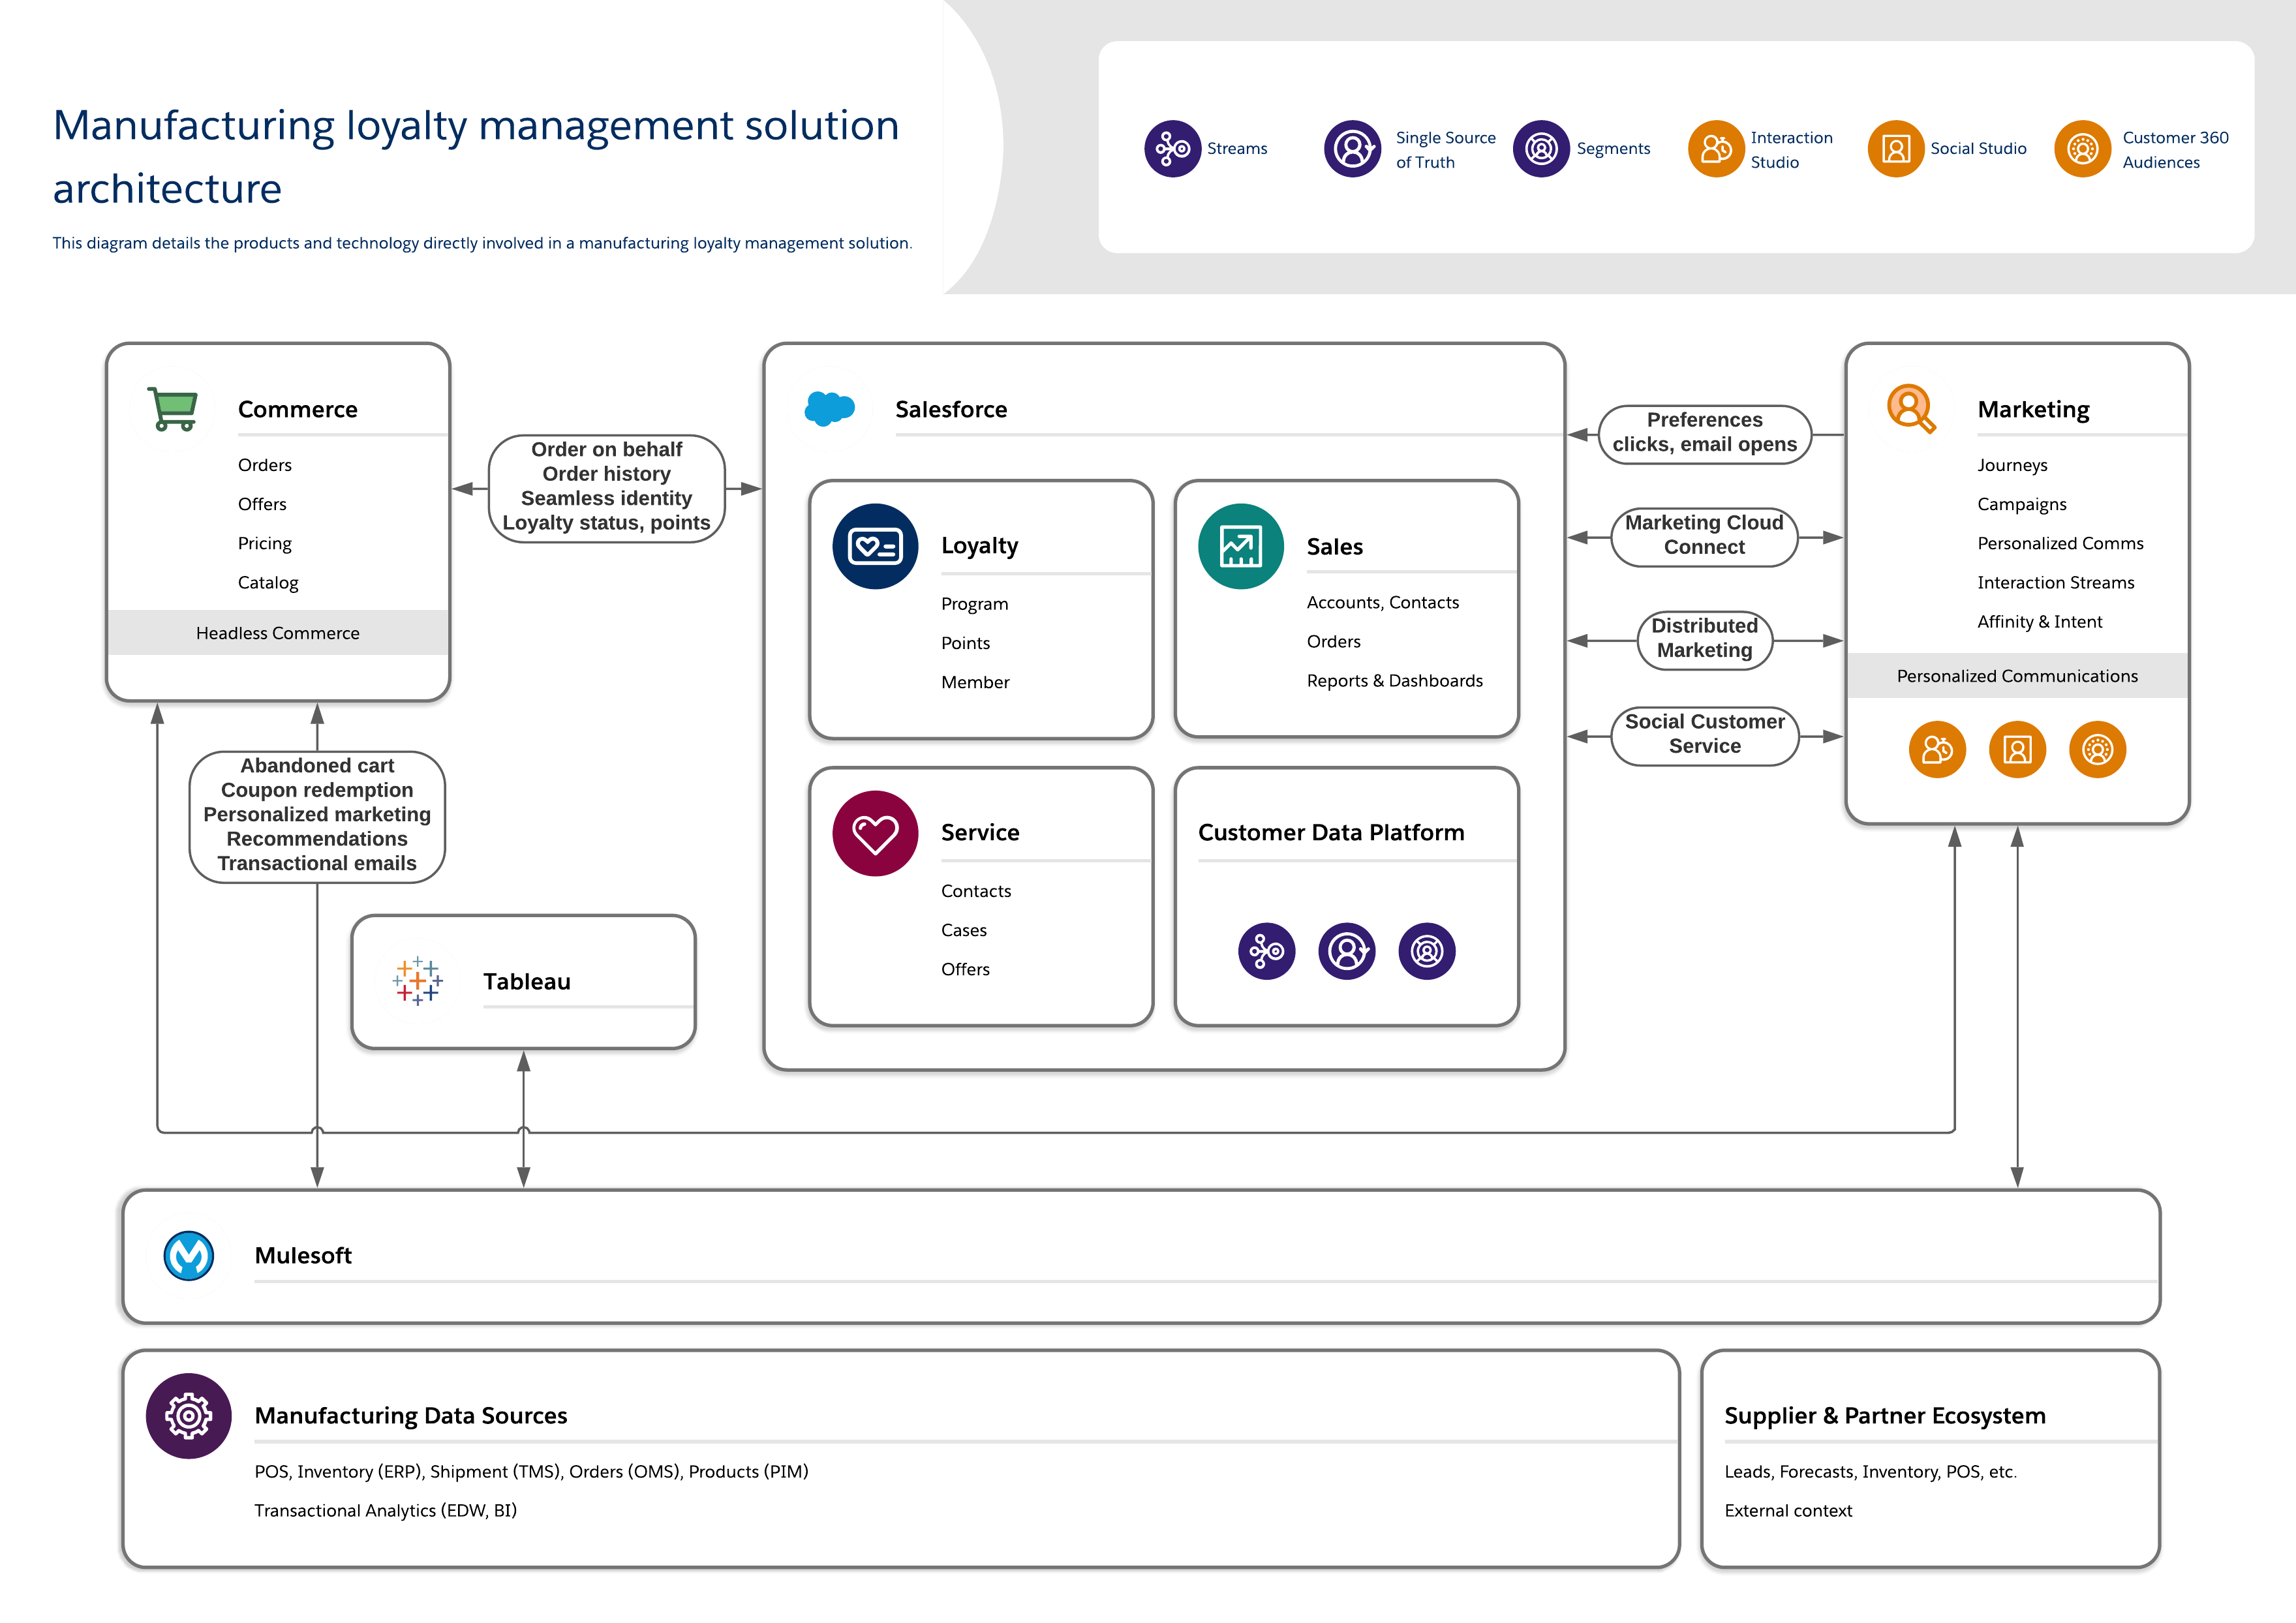 Manufacturing Loyalty Management Solution Architecture